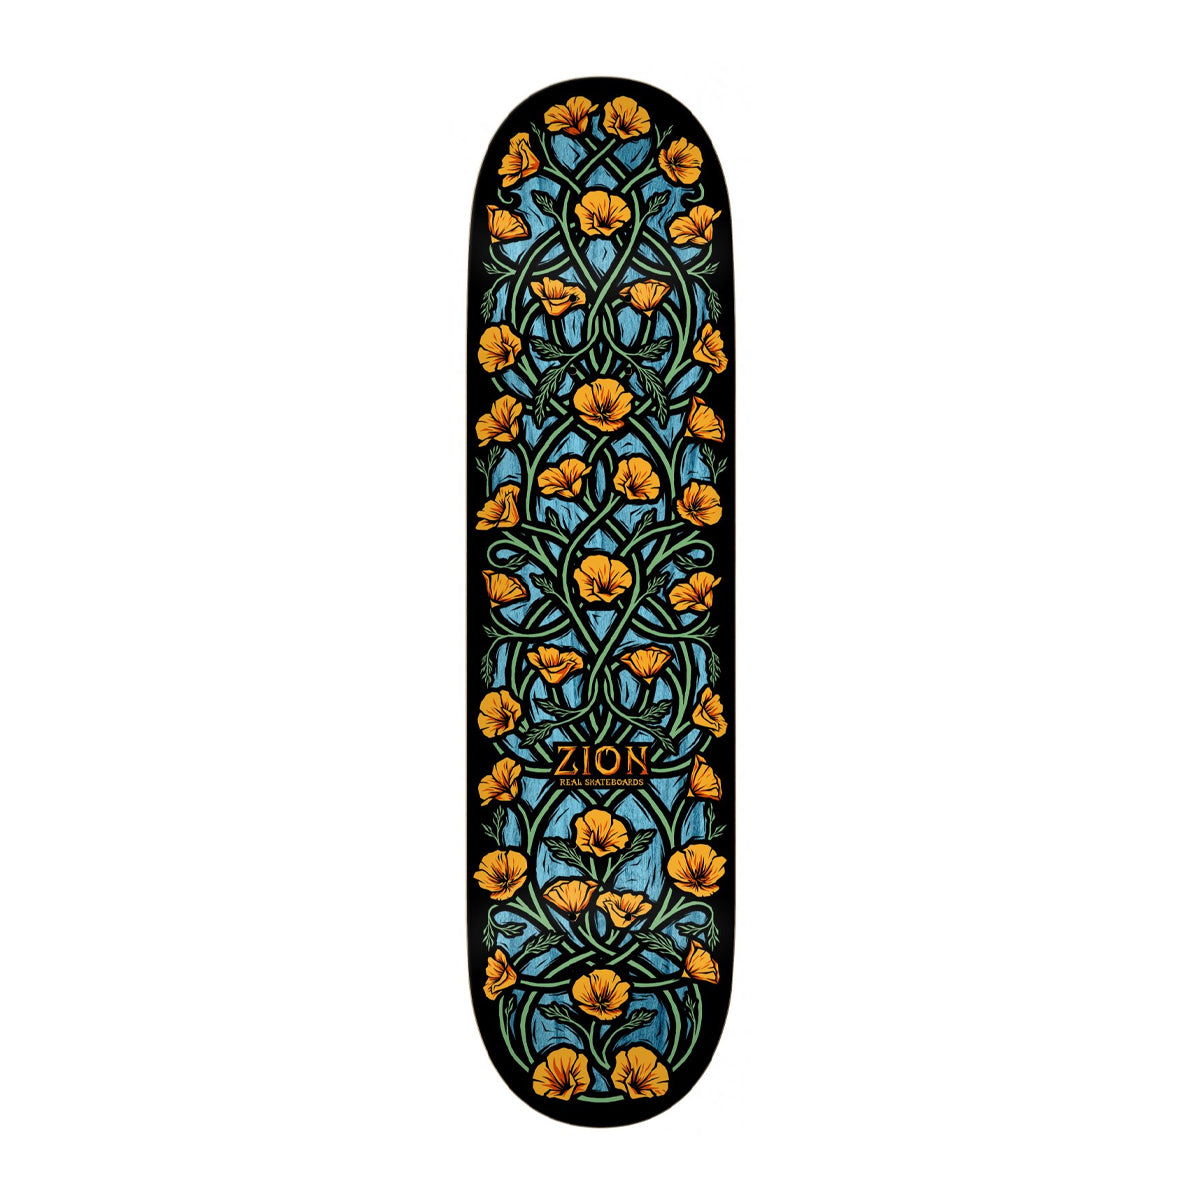 Real Zion Wright Intertwined Skateboard Deck 8.5" - Apple Valley Emporium